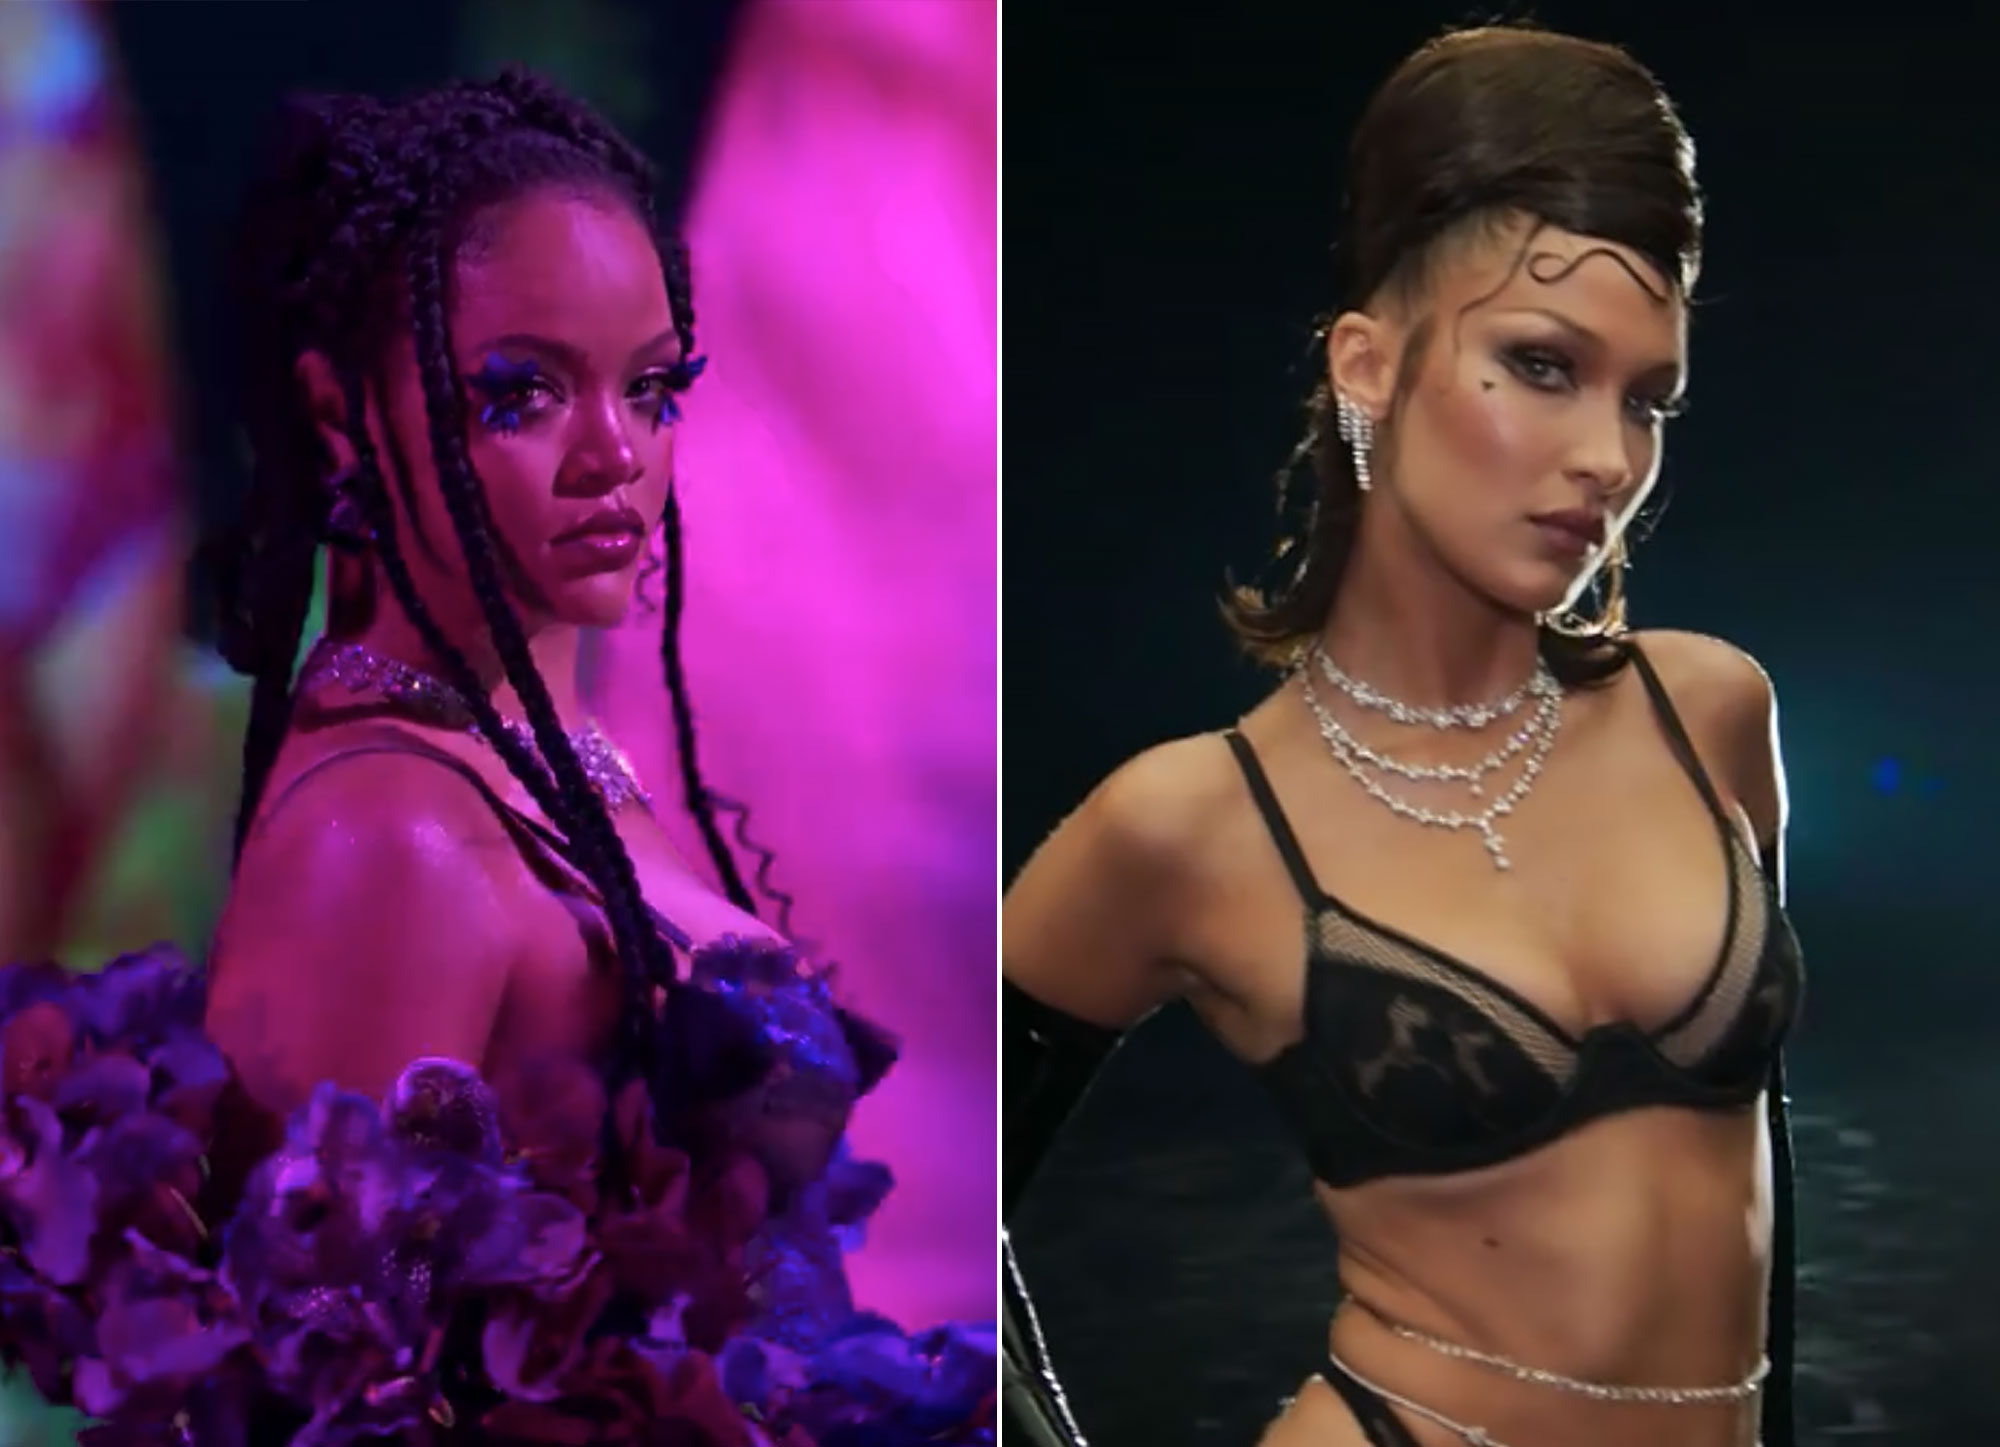 Savage X Fenty Show Vol. 4: How to Watch, Who is Modeling, Who Are